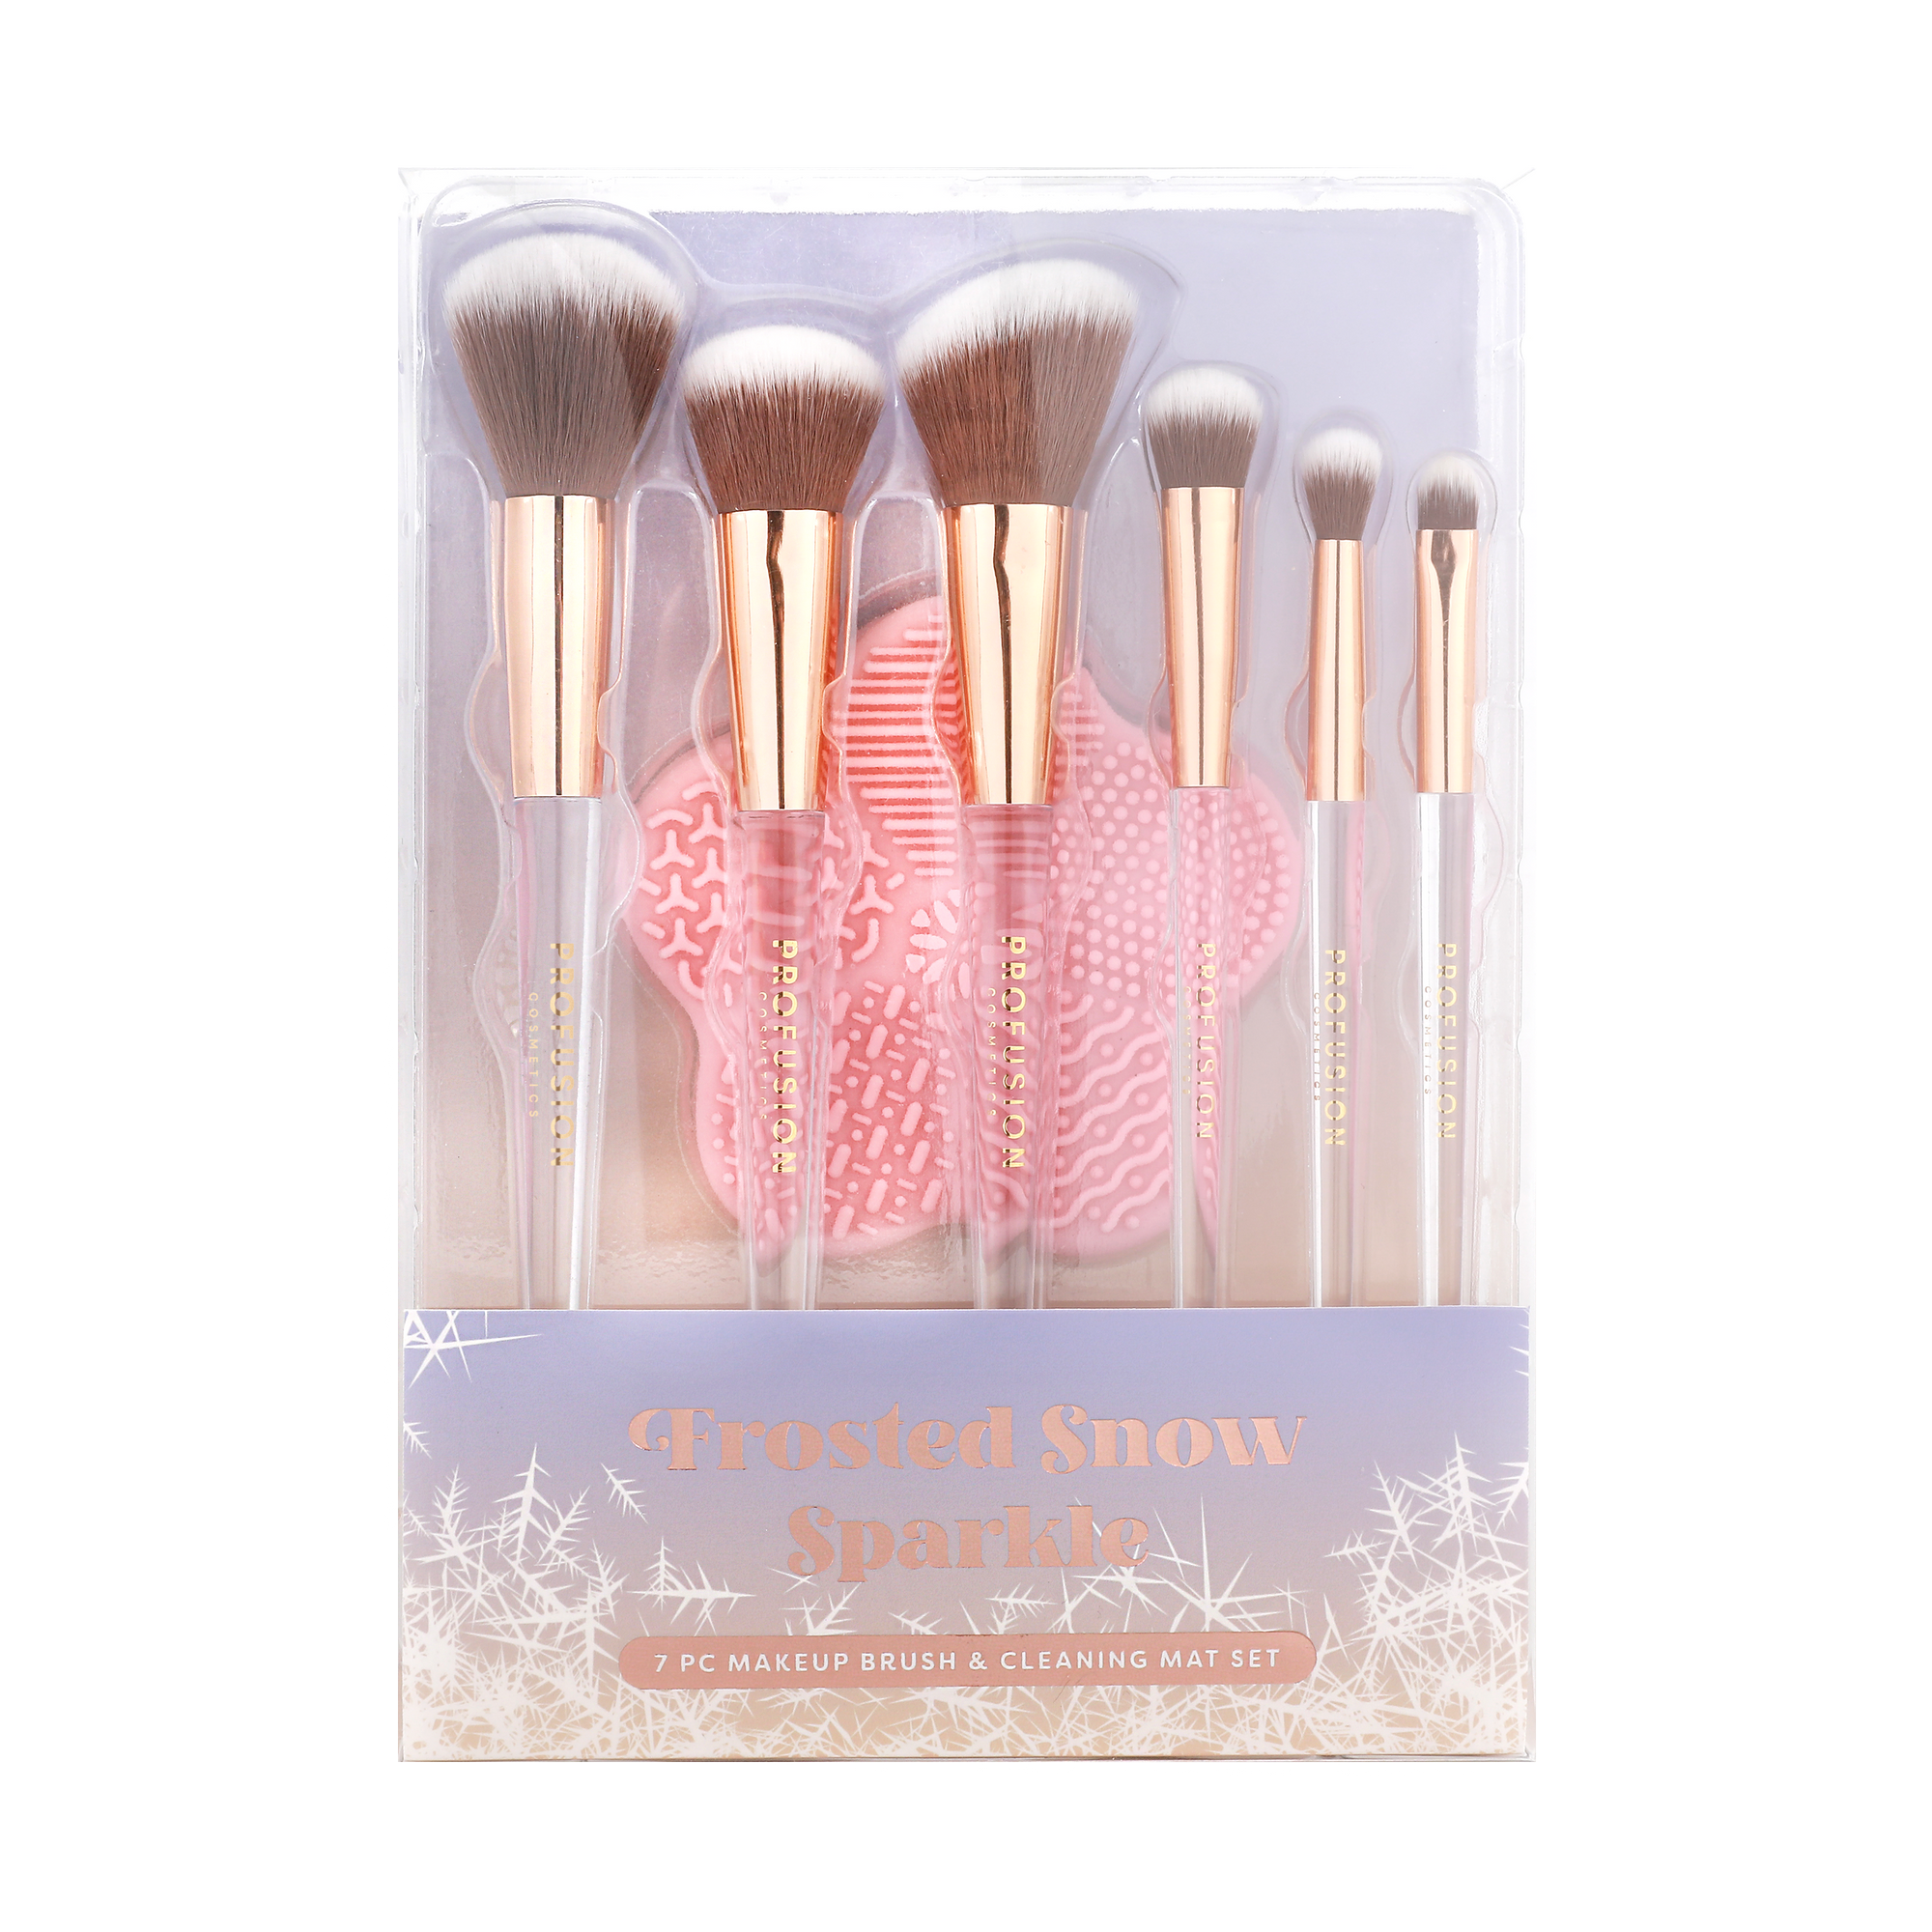 6 makeup brush with brush cleaner in a box